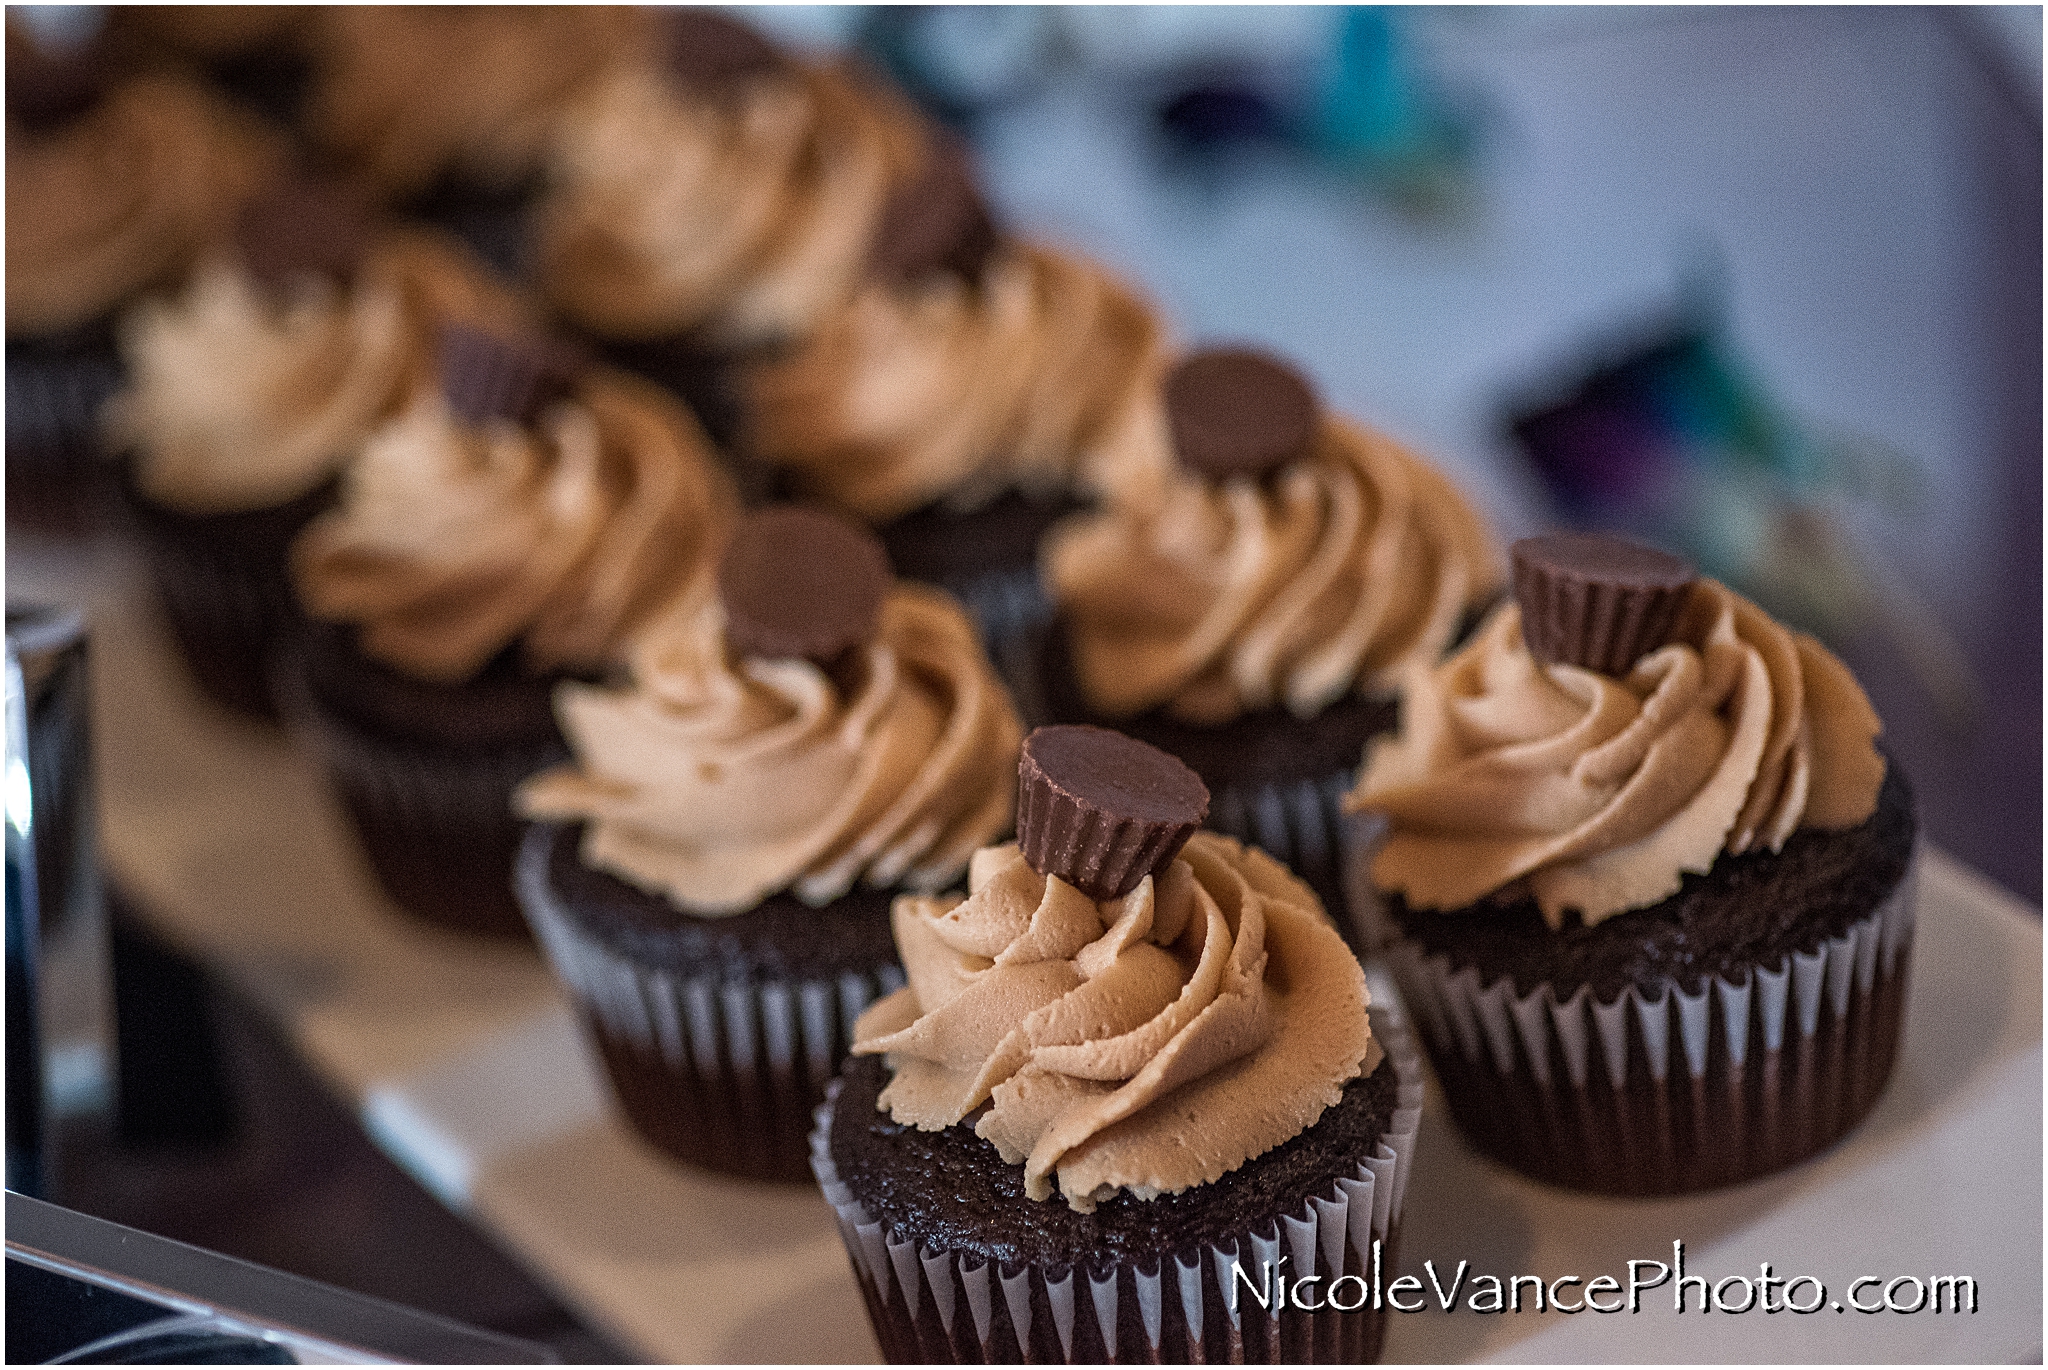 Cupcakes were provided by Kakealicious at the wedding reception at The Brownstone.